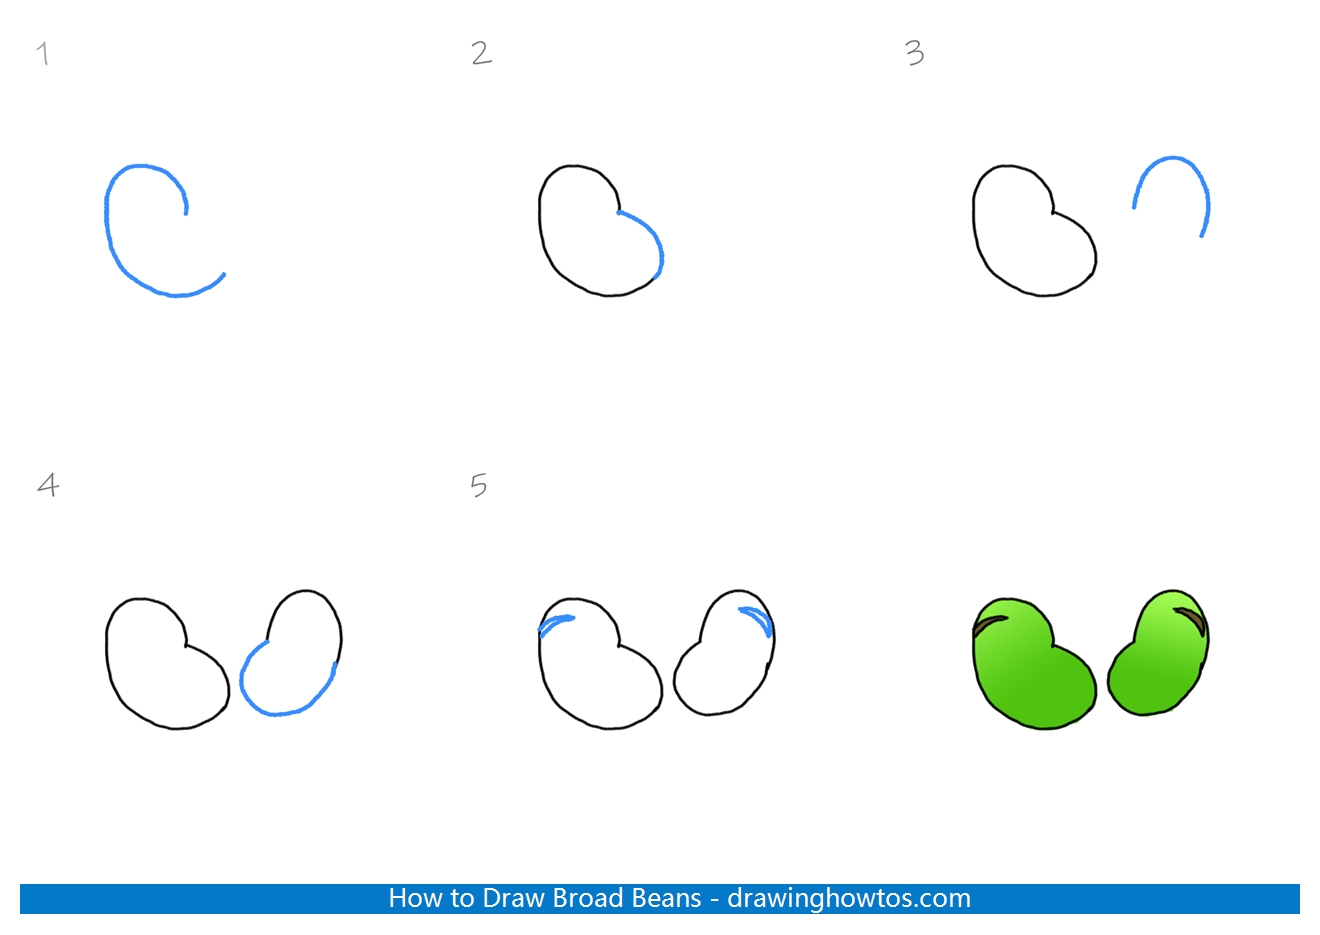 How to Draw Broad Beans